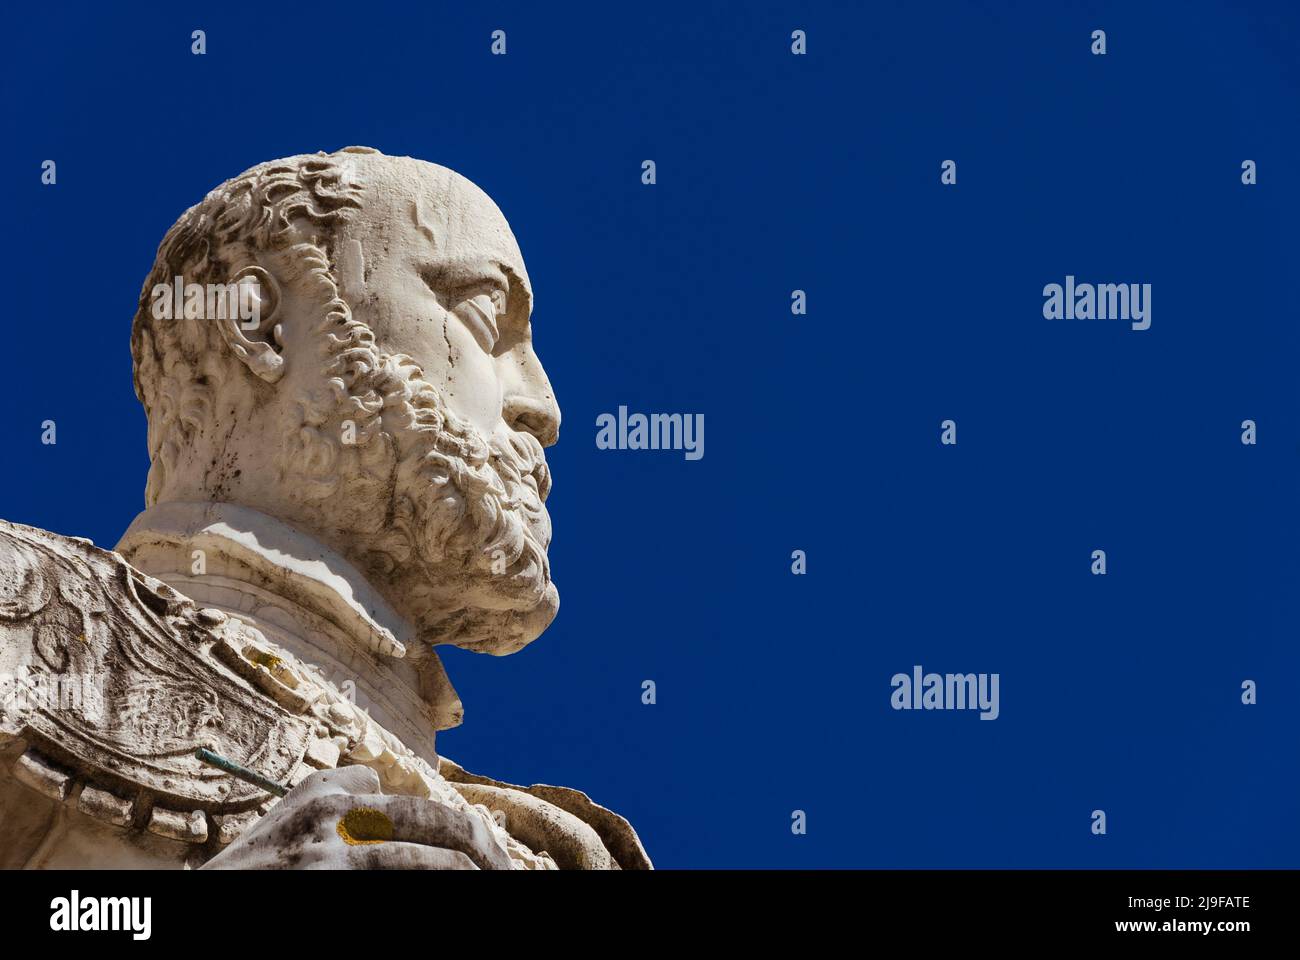 Cosimo I de' Medici, Grand Duke of Tuscany. A marble statue erected in 1596 in the historical center of Pisa (with blue sky and copy space) Stock Photo